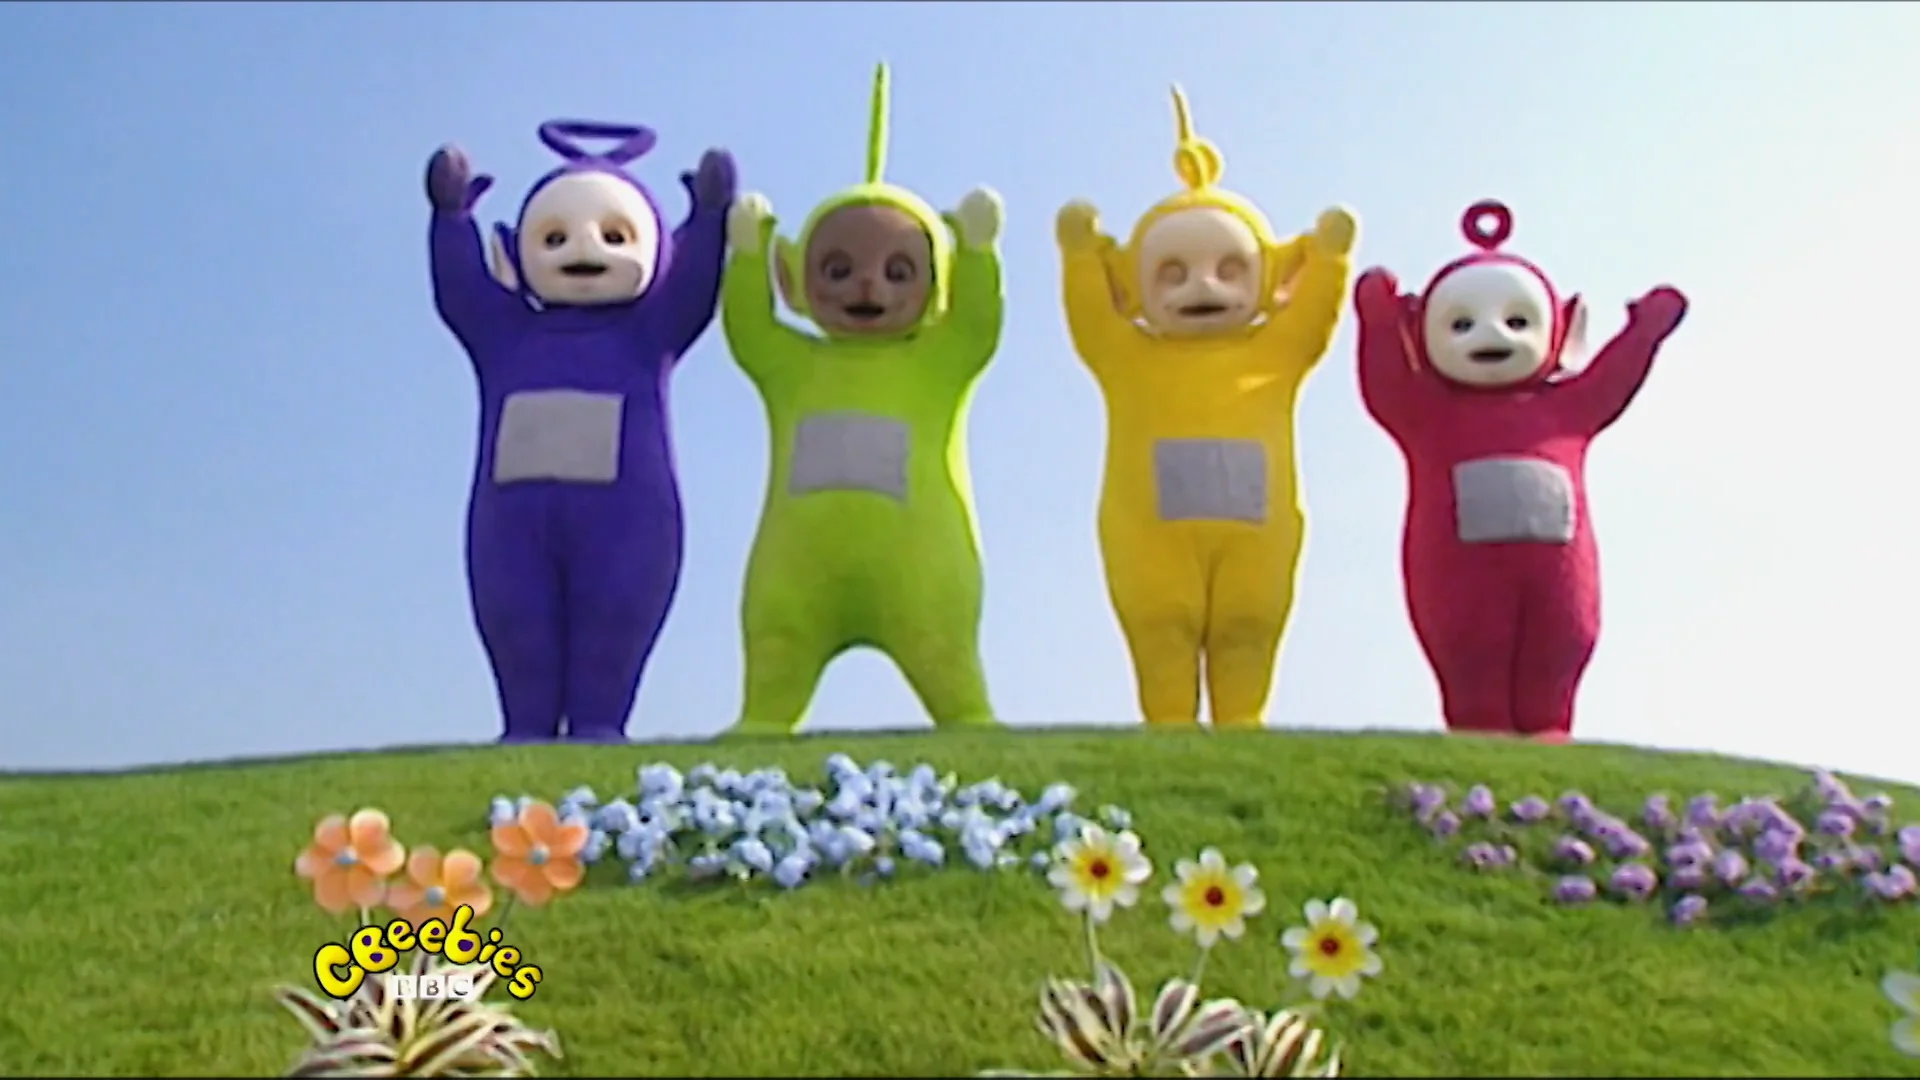 Teletubbies - everything you need to know about the new CBeebies